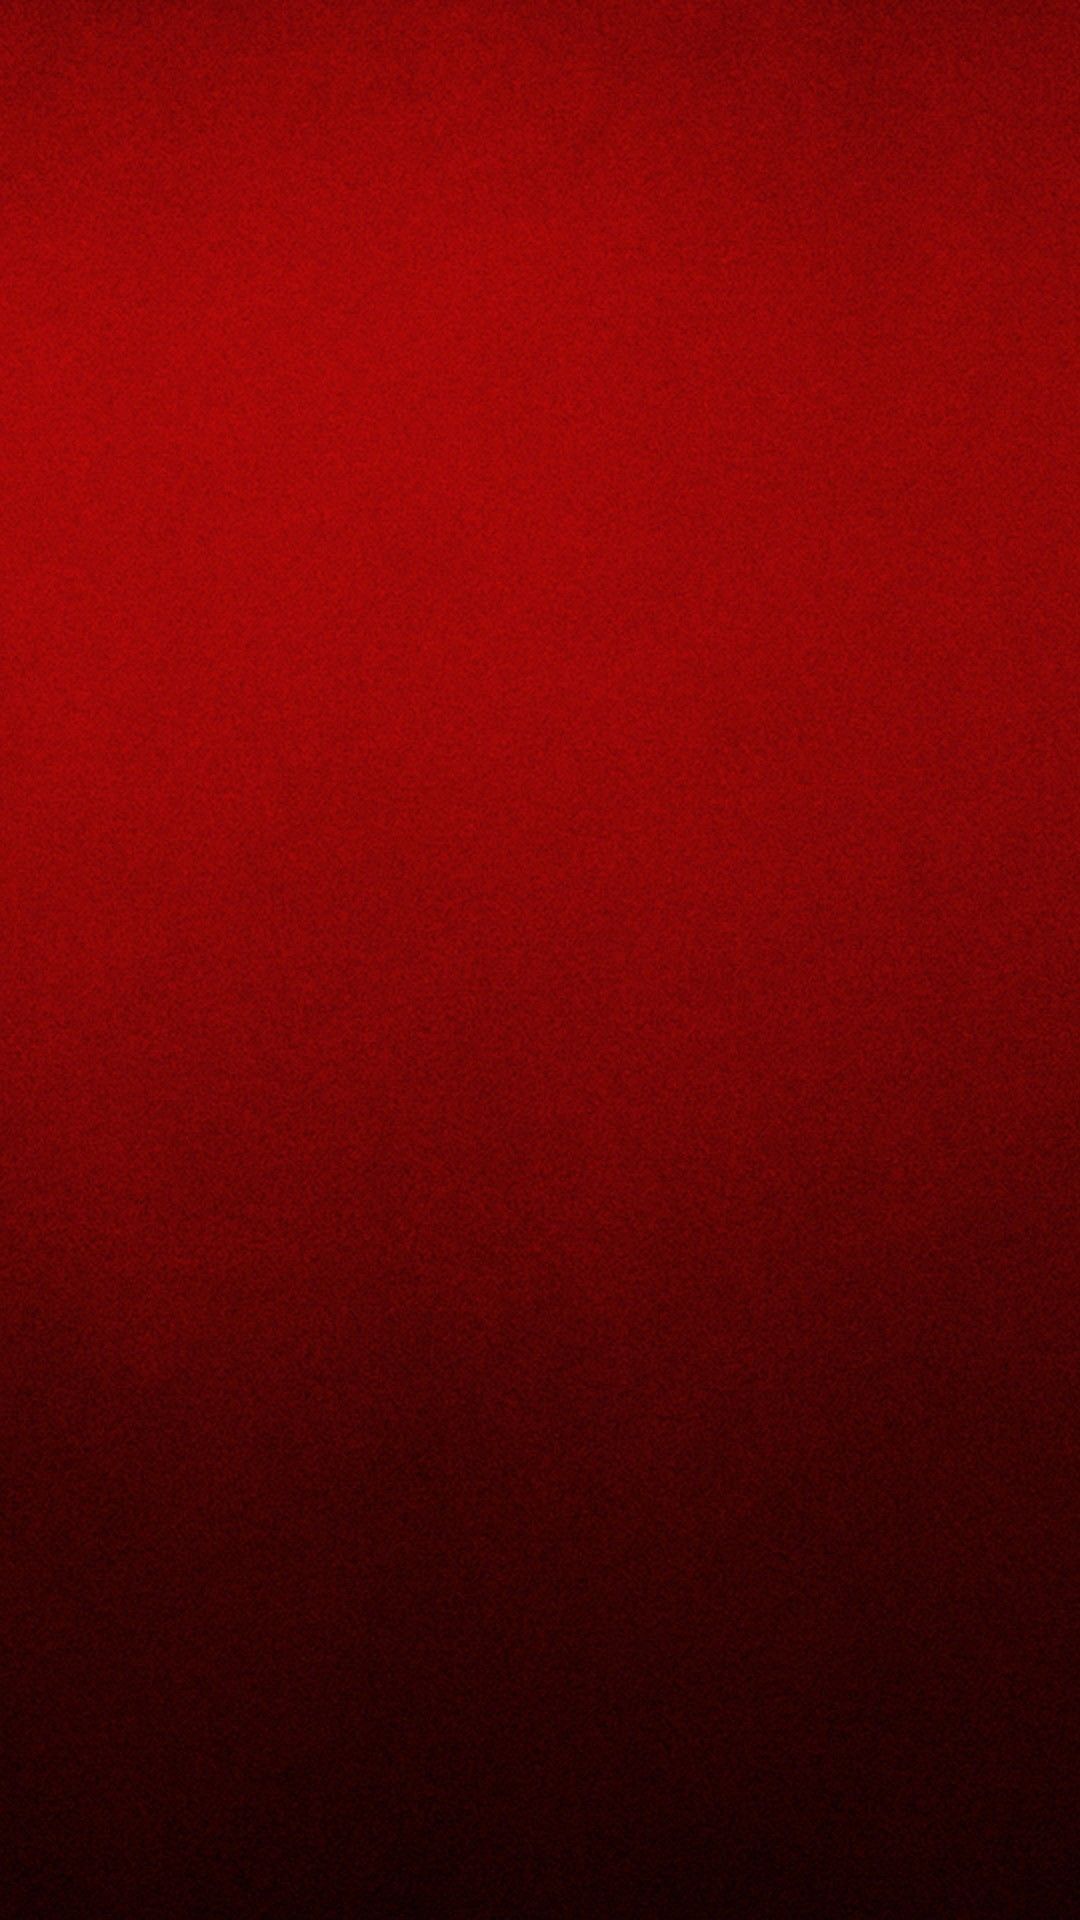 Ombre Orang Red. Red wallpaper, Red colour wallpaper, Ombre wallpaper iphone